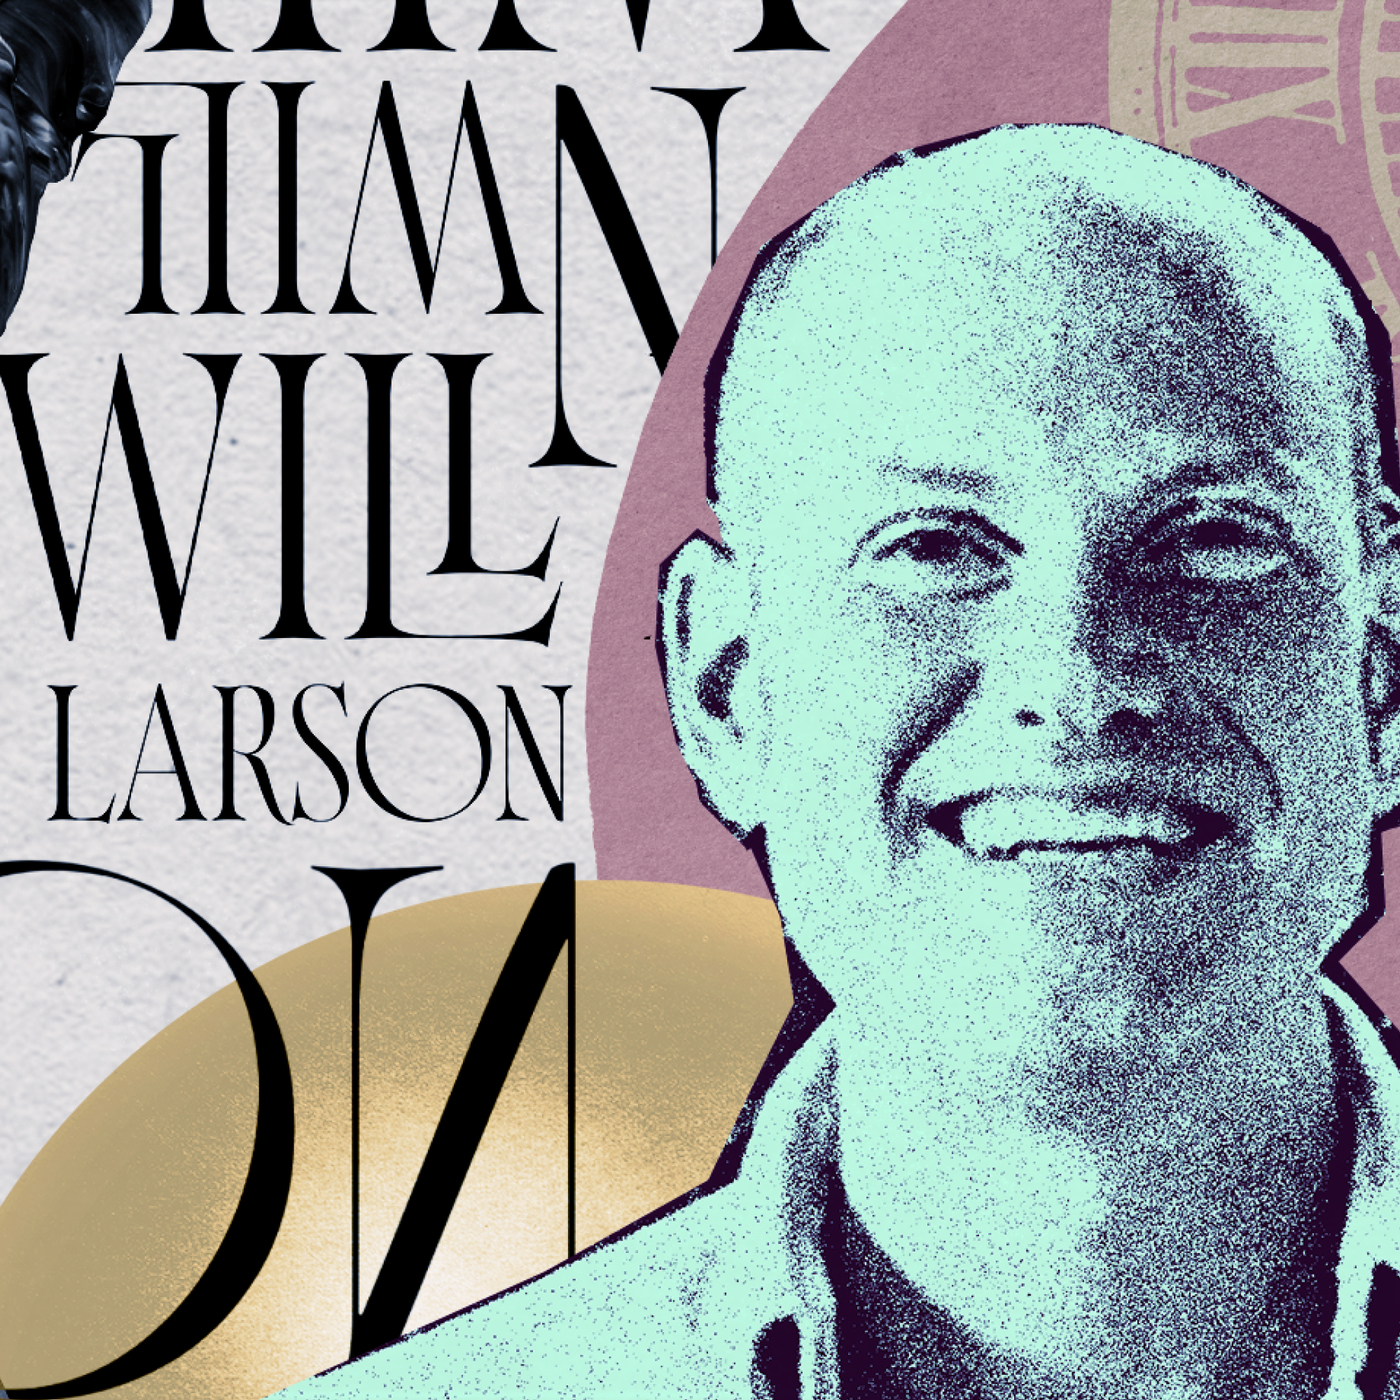 Calm’s Will Larson on how to build a technical leadership career